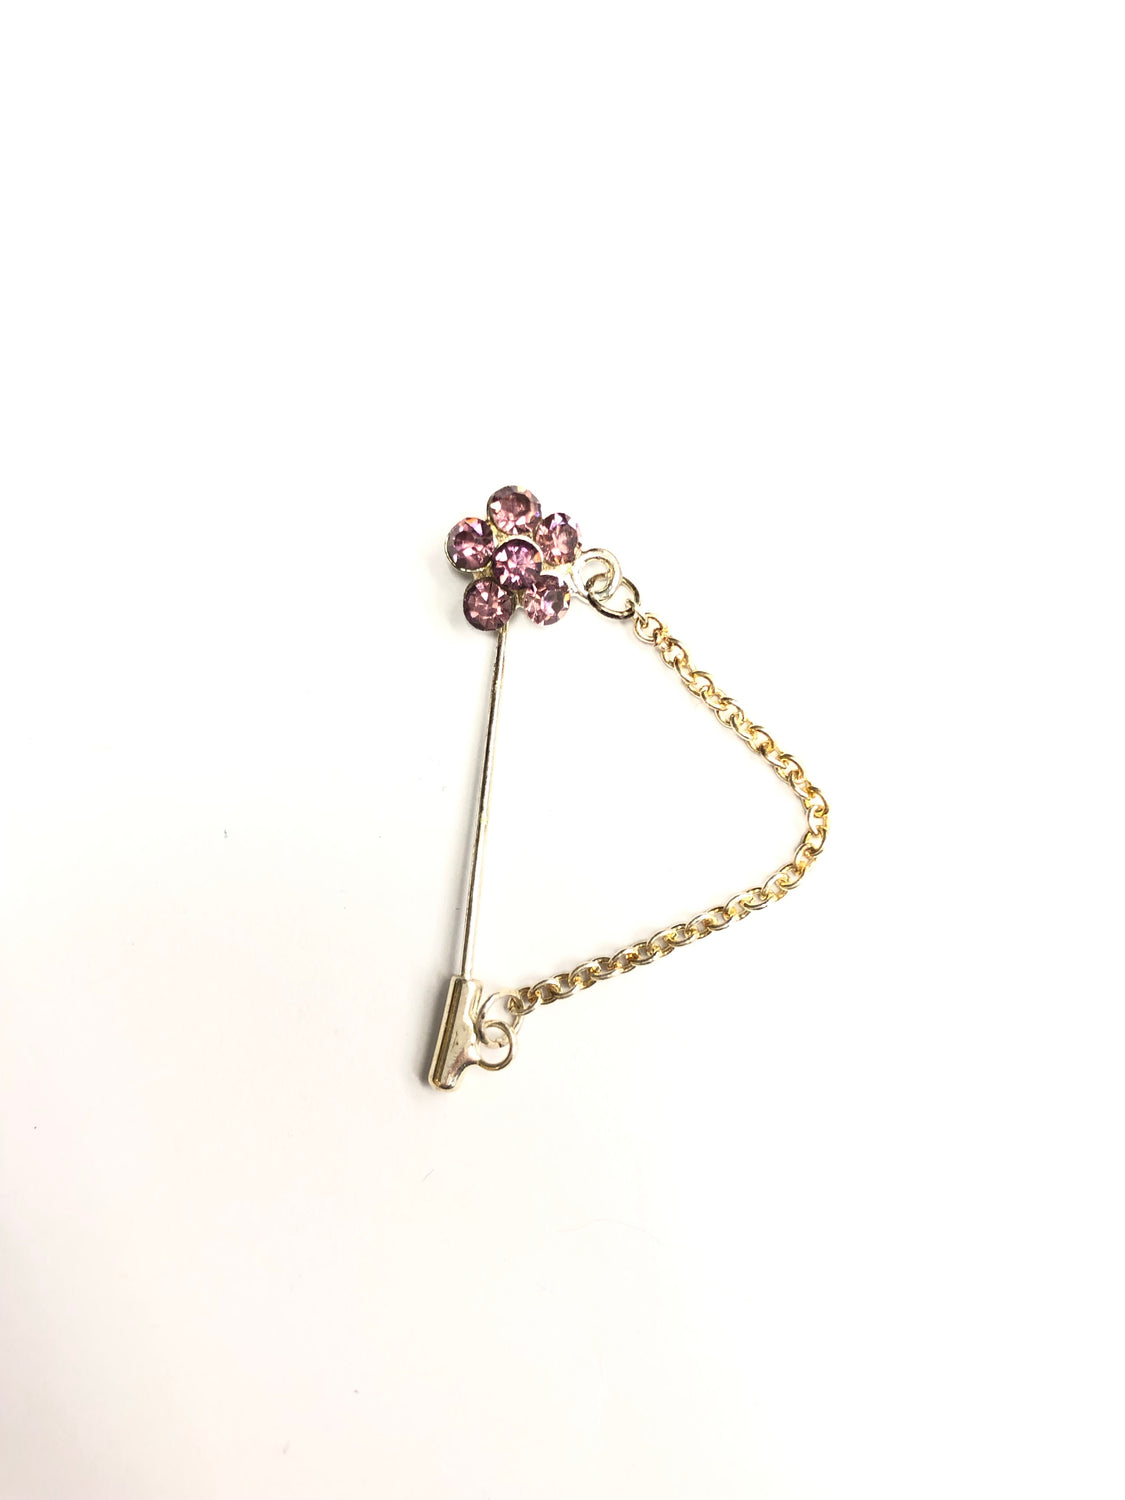 silver clasp pin with light pink floral jewel and a chain